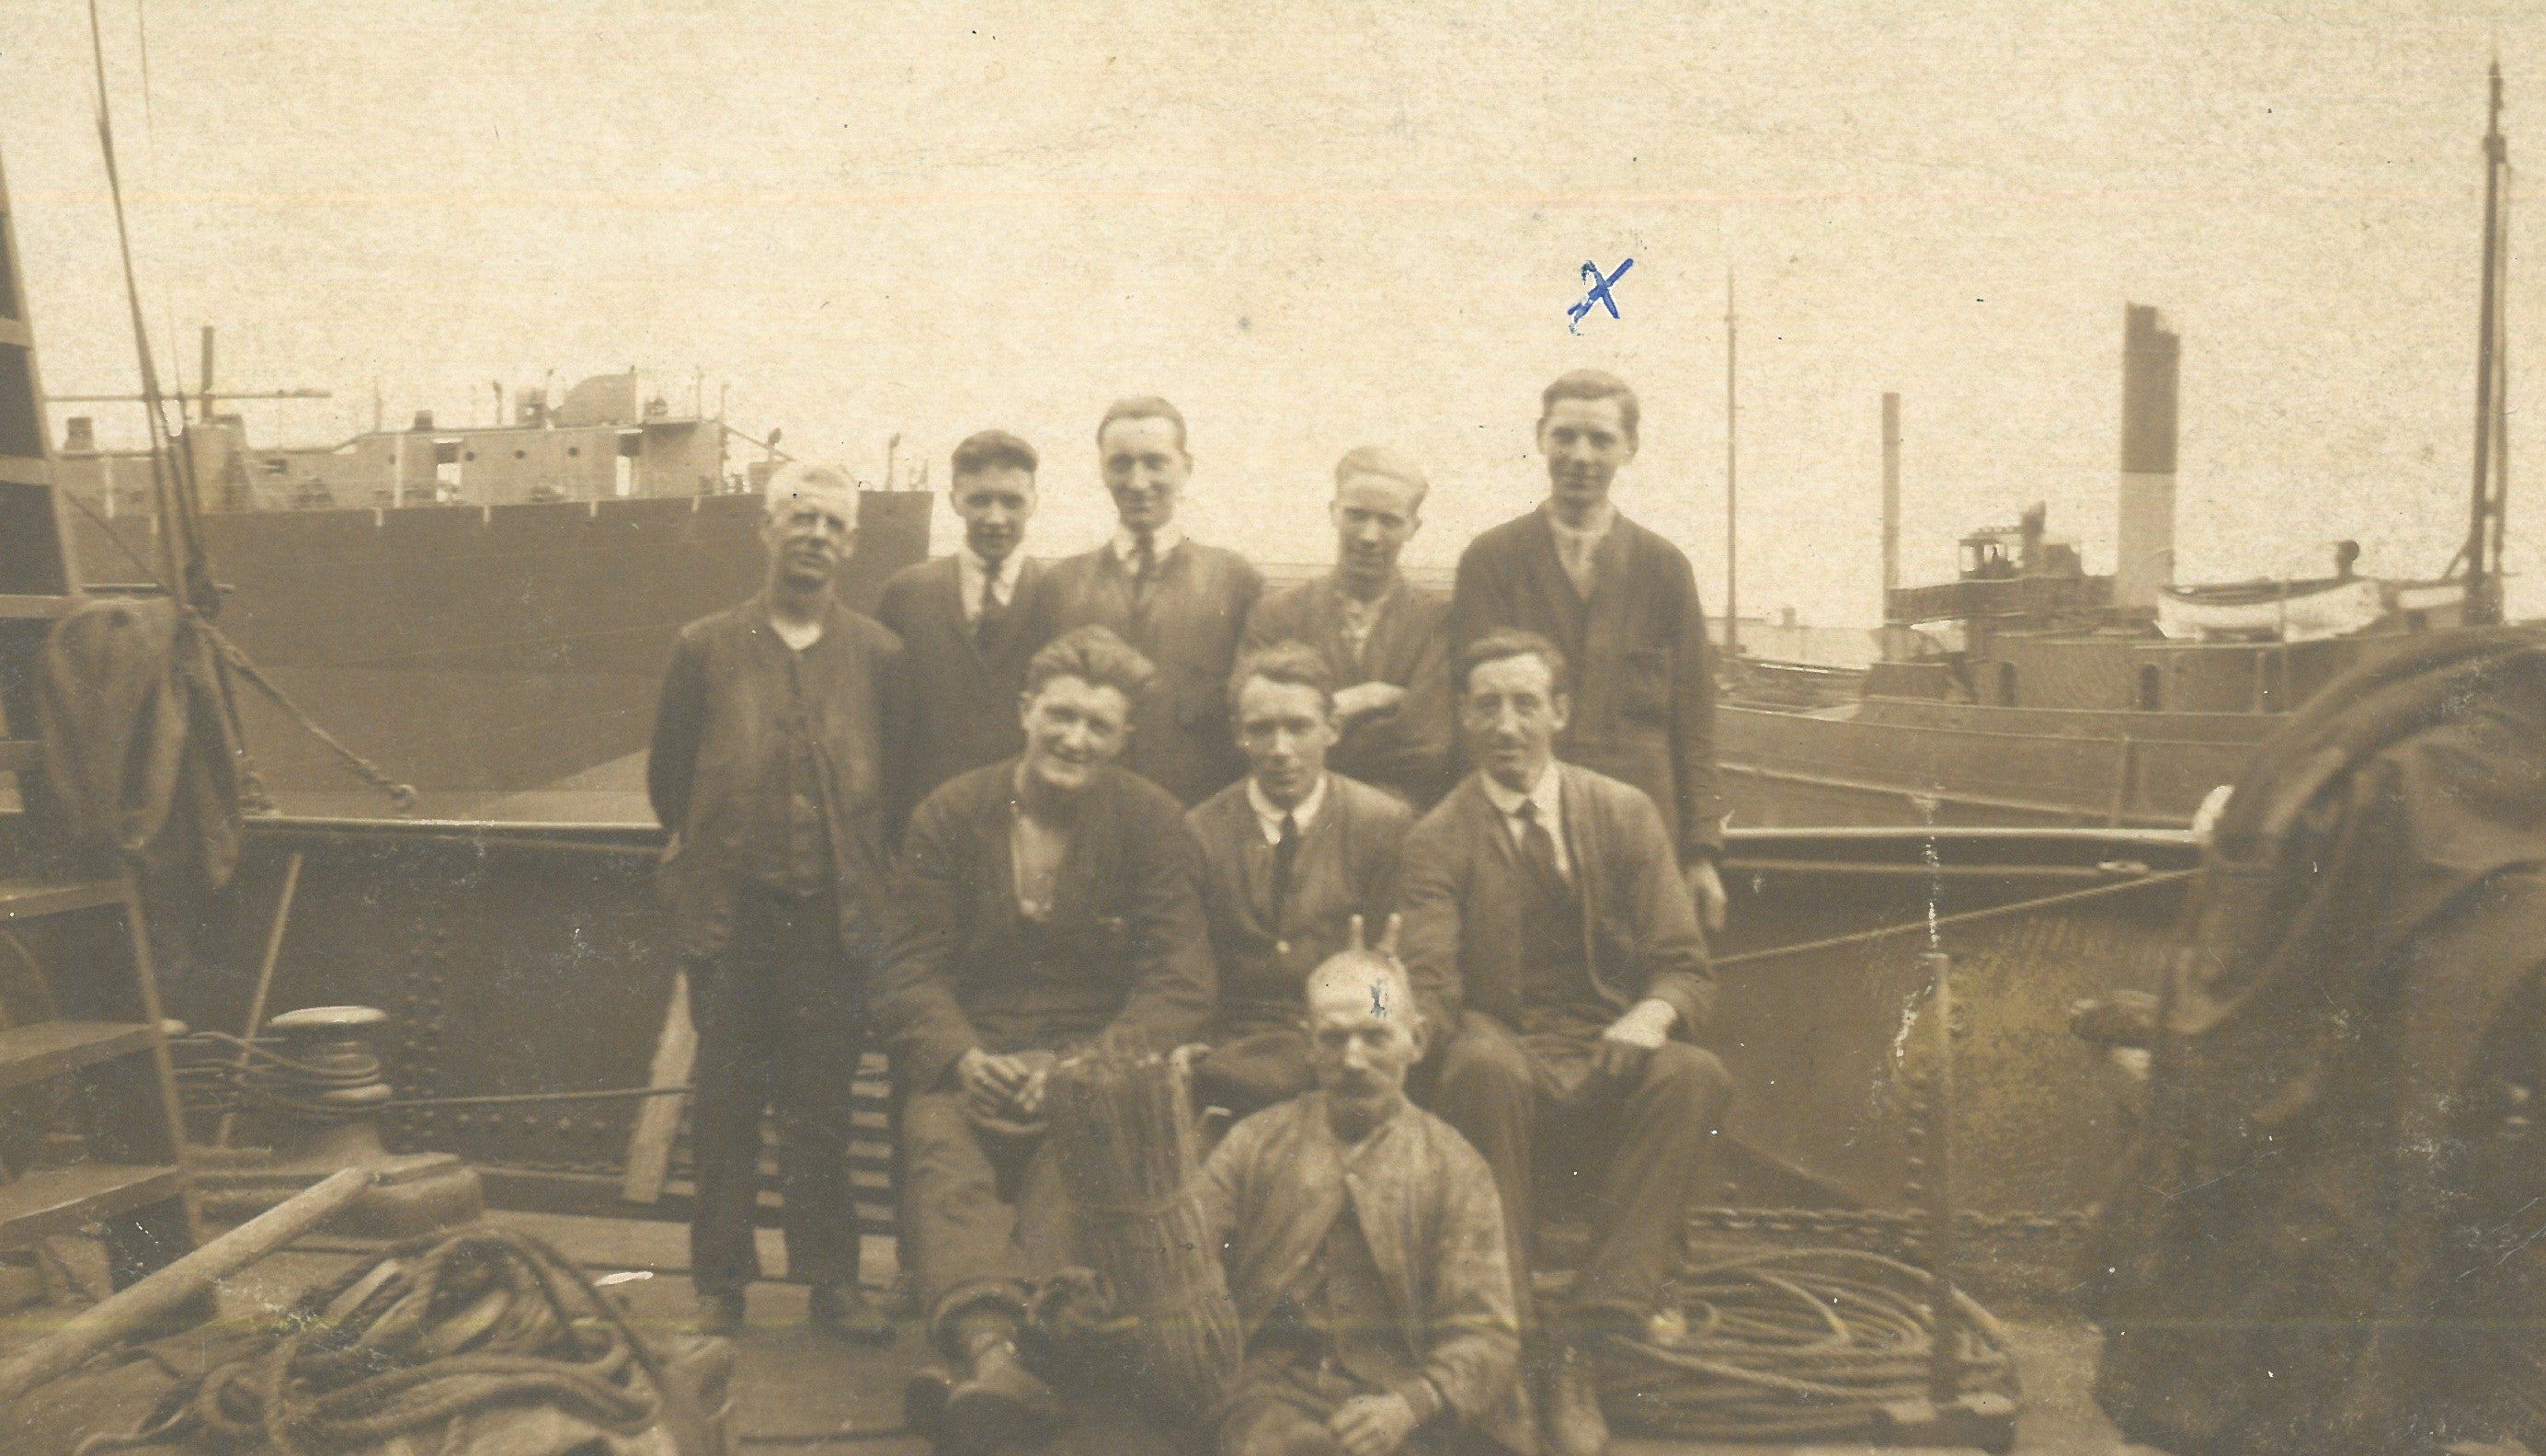 An old image of workers from the business many years ago smiling aboard one of the ships they have been working on. One of the workers has put his fingers up jokingly behind an older man.